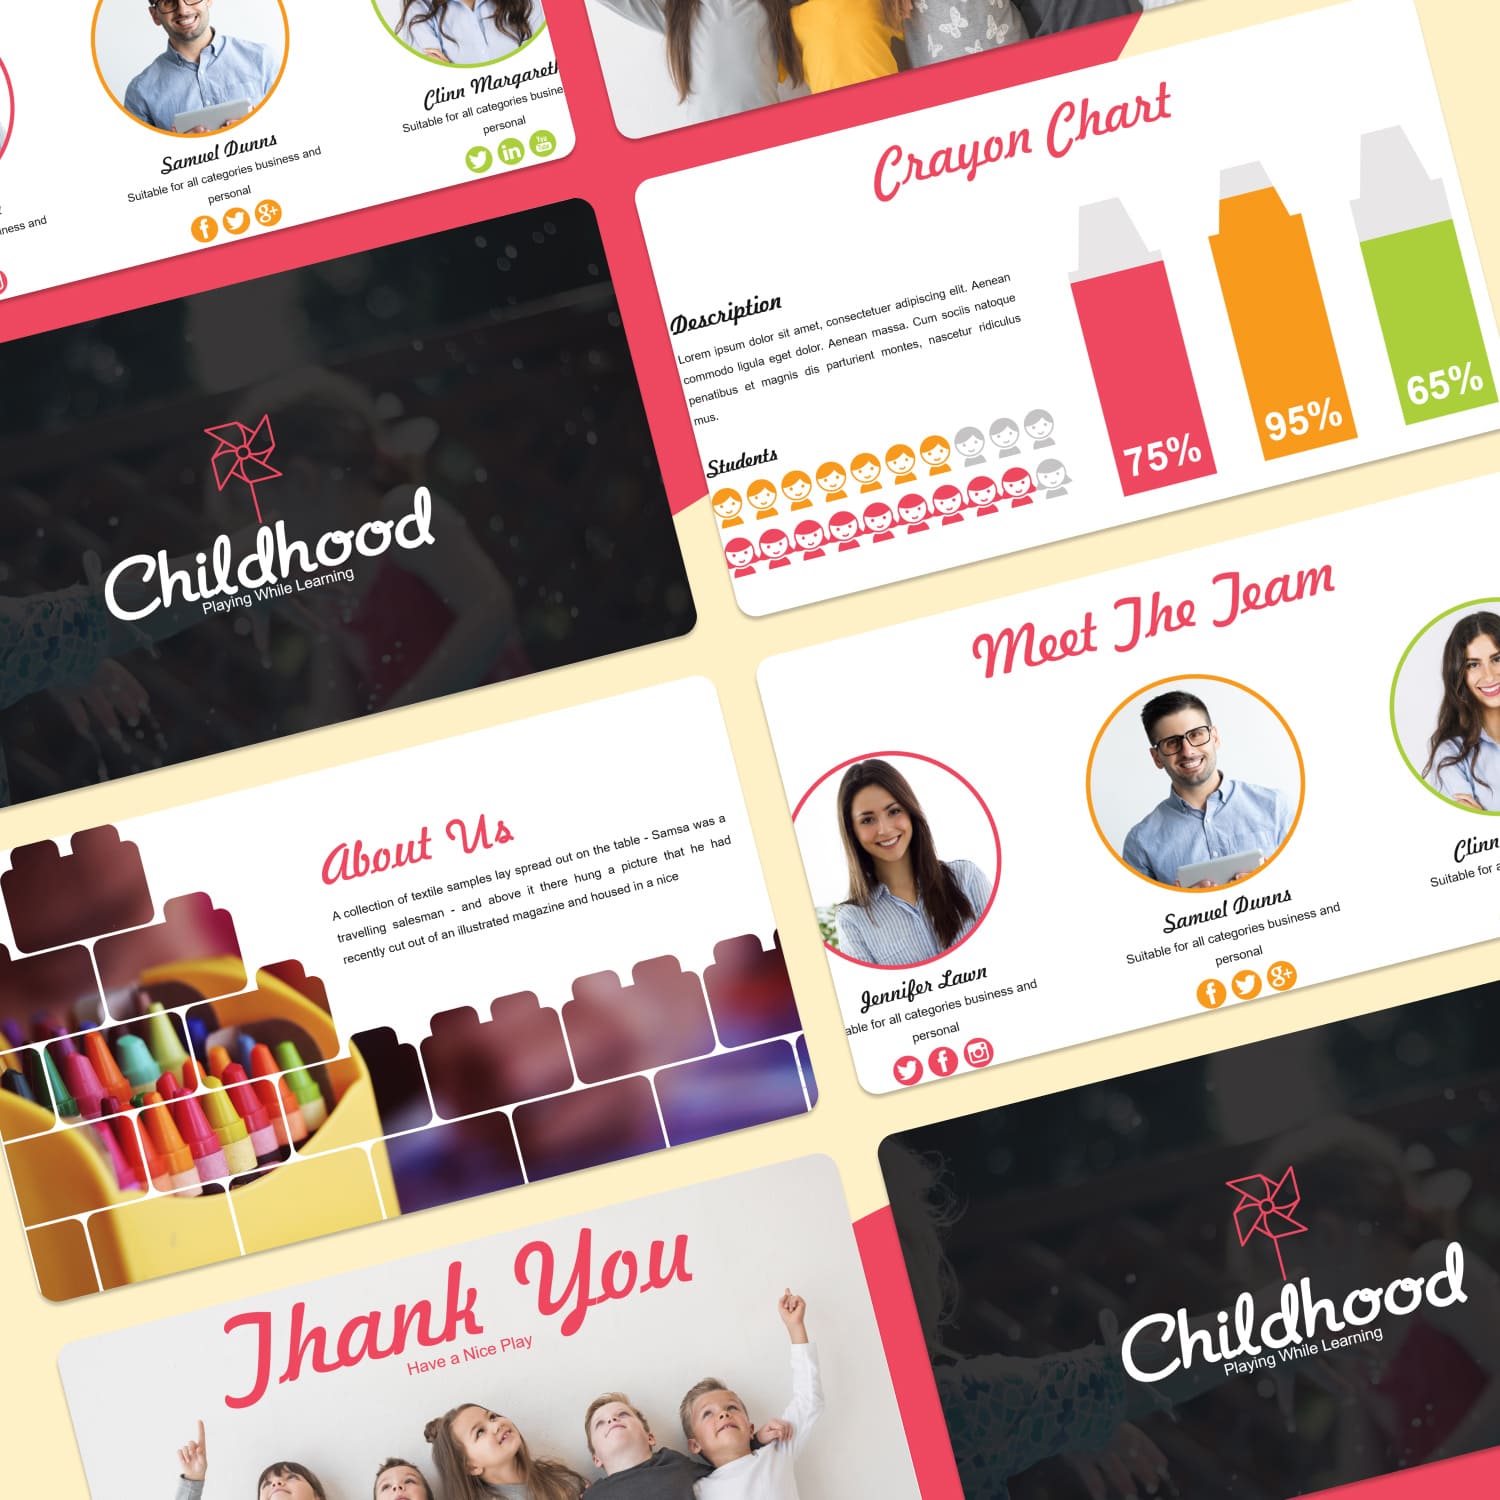 Childhood - Playful Powerpoint cover image.